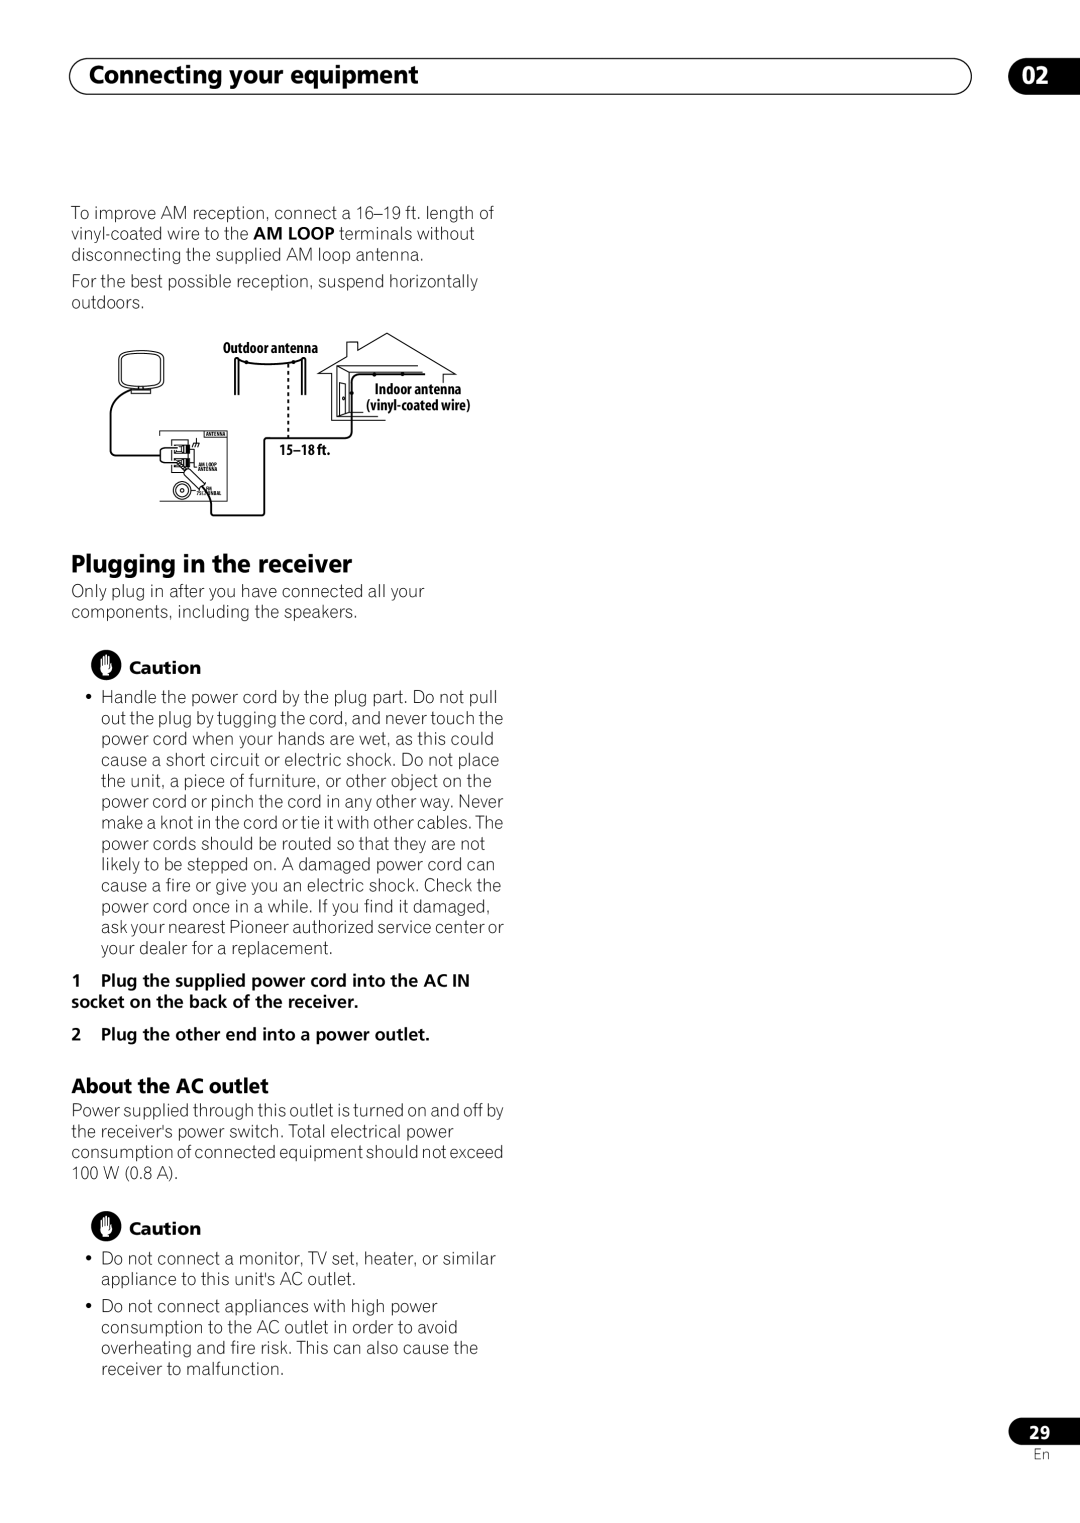 Pioneer VSX-59TXi operating instructions Plugging in the receiver, About the AC outlet, Connecting your equipment 